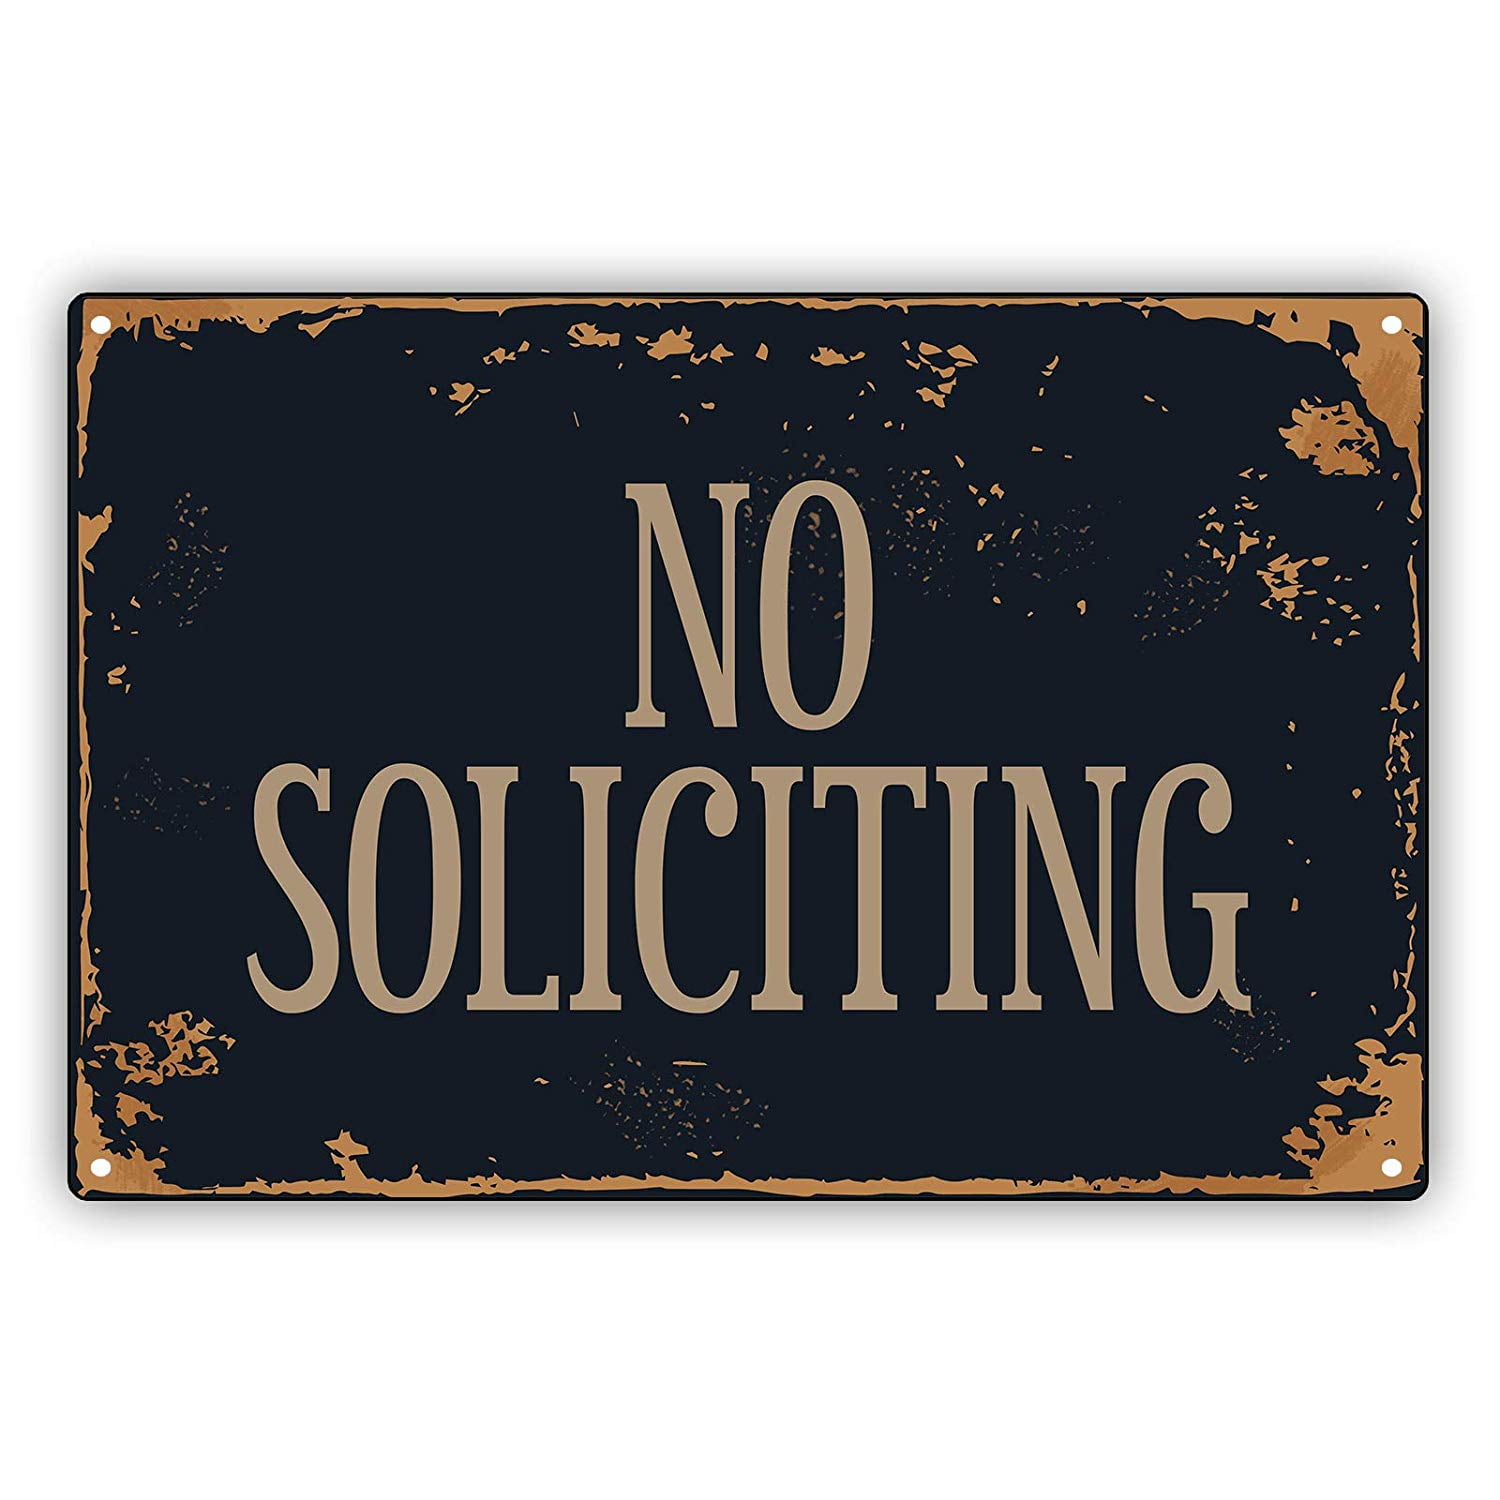 NO SOLICITING Aluminum Sign New Cool 